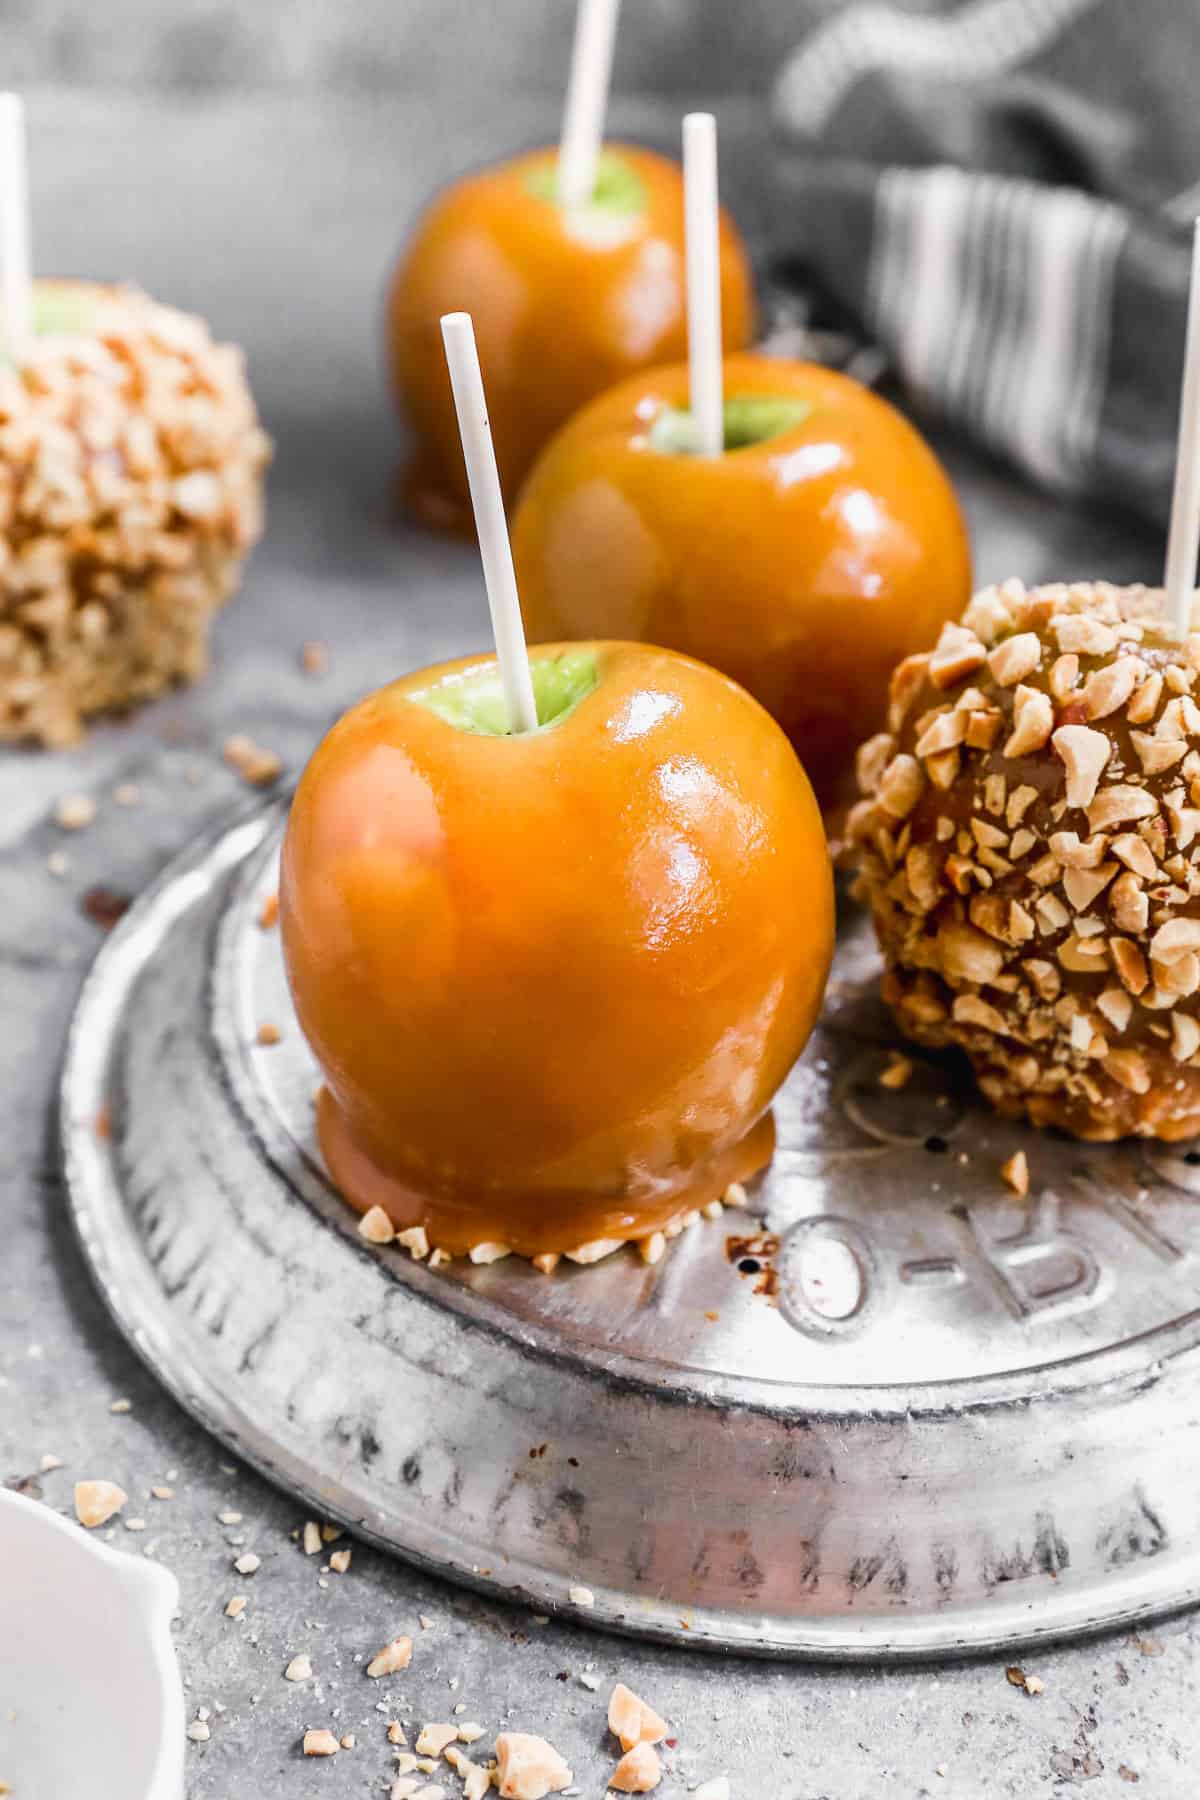 69 Delicious Apple Recipes That Bring All The Fall Flavor